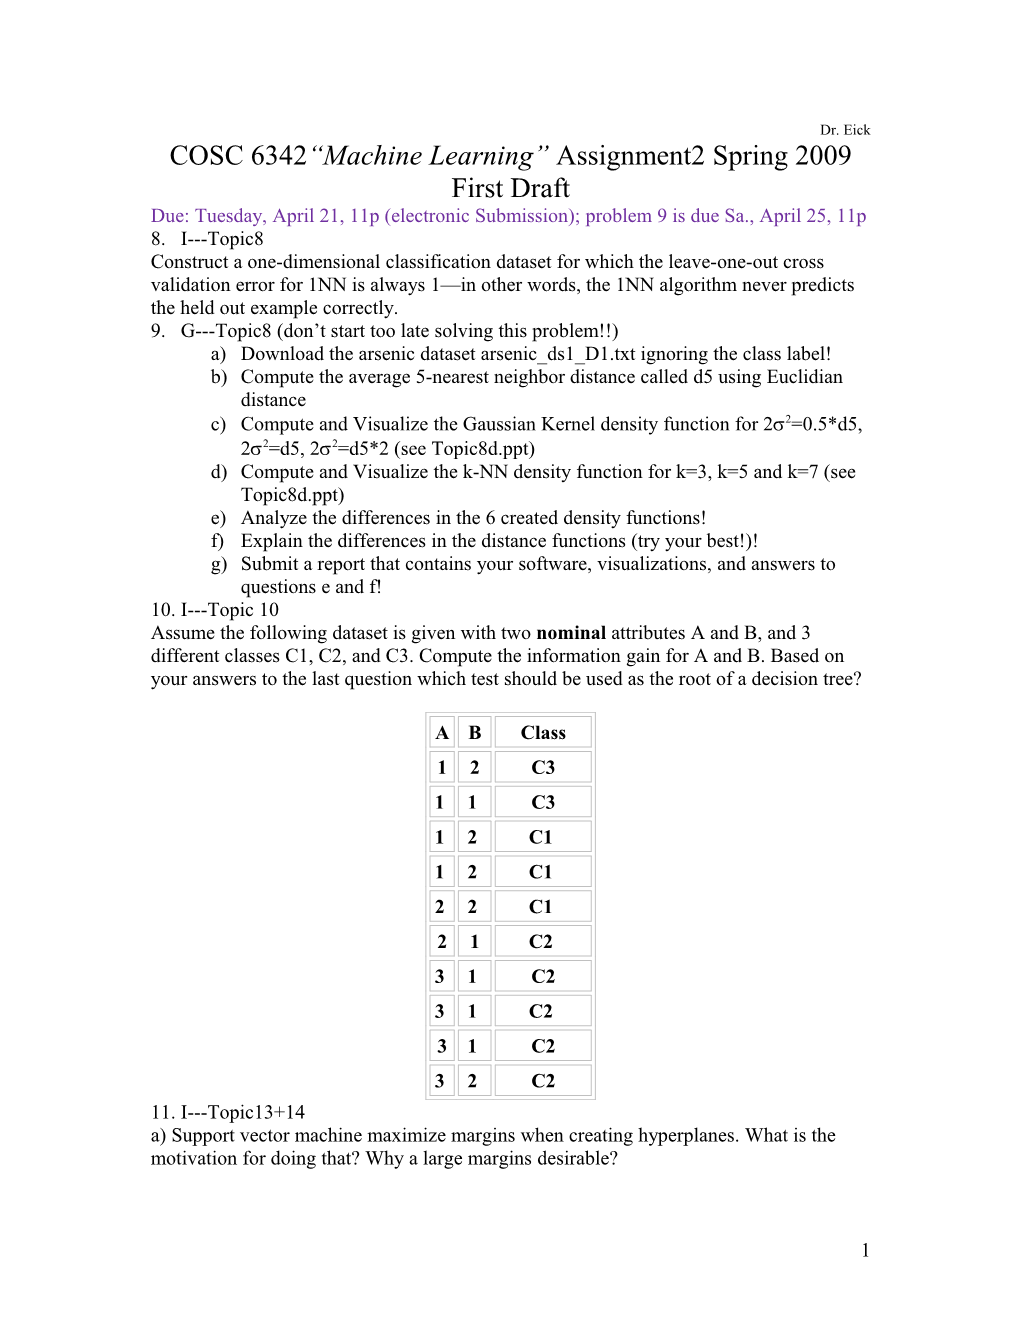 COSC 6342 Machine Learning Assignment2spring 2009